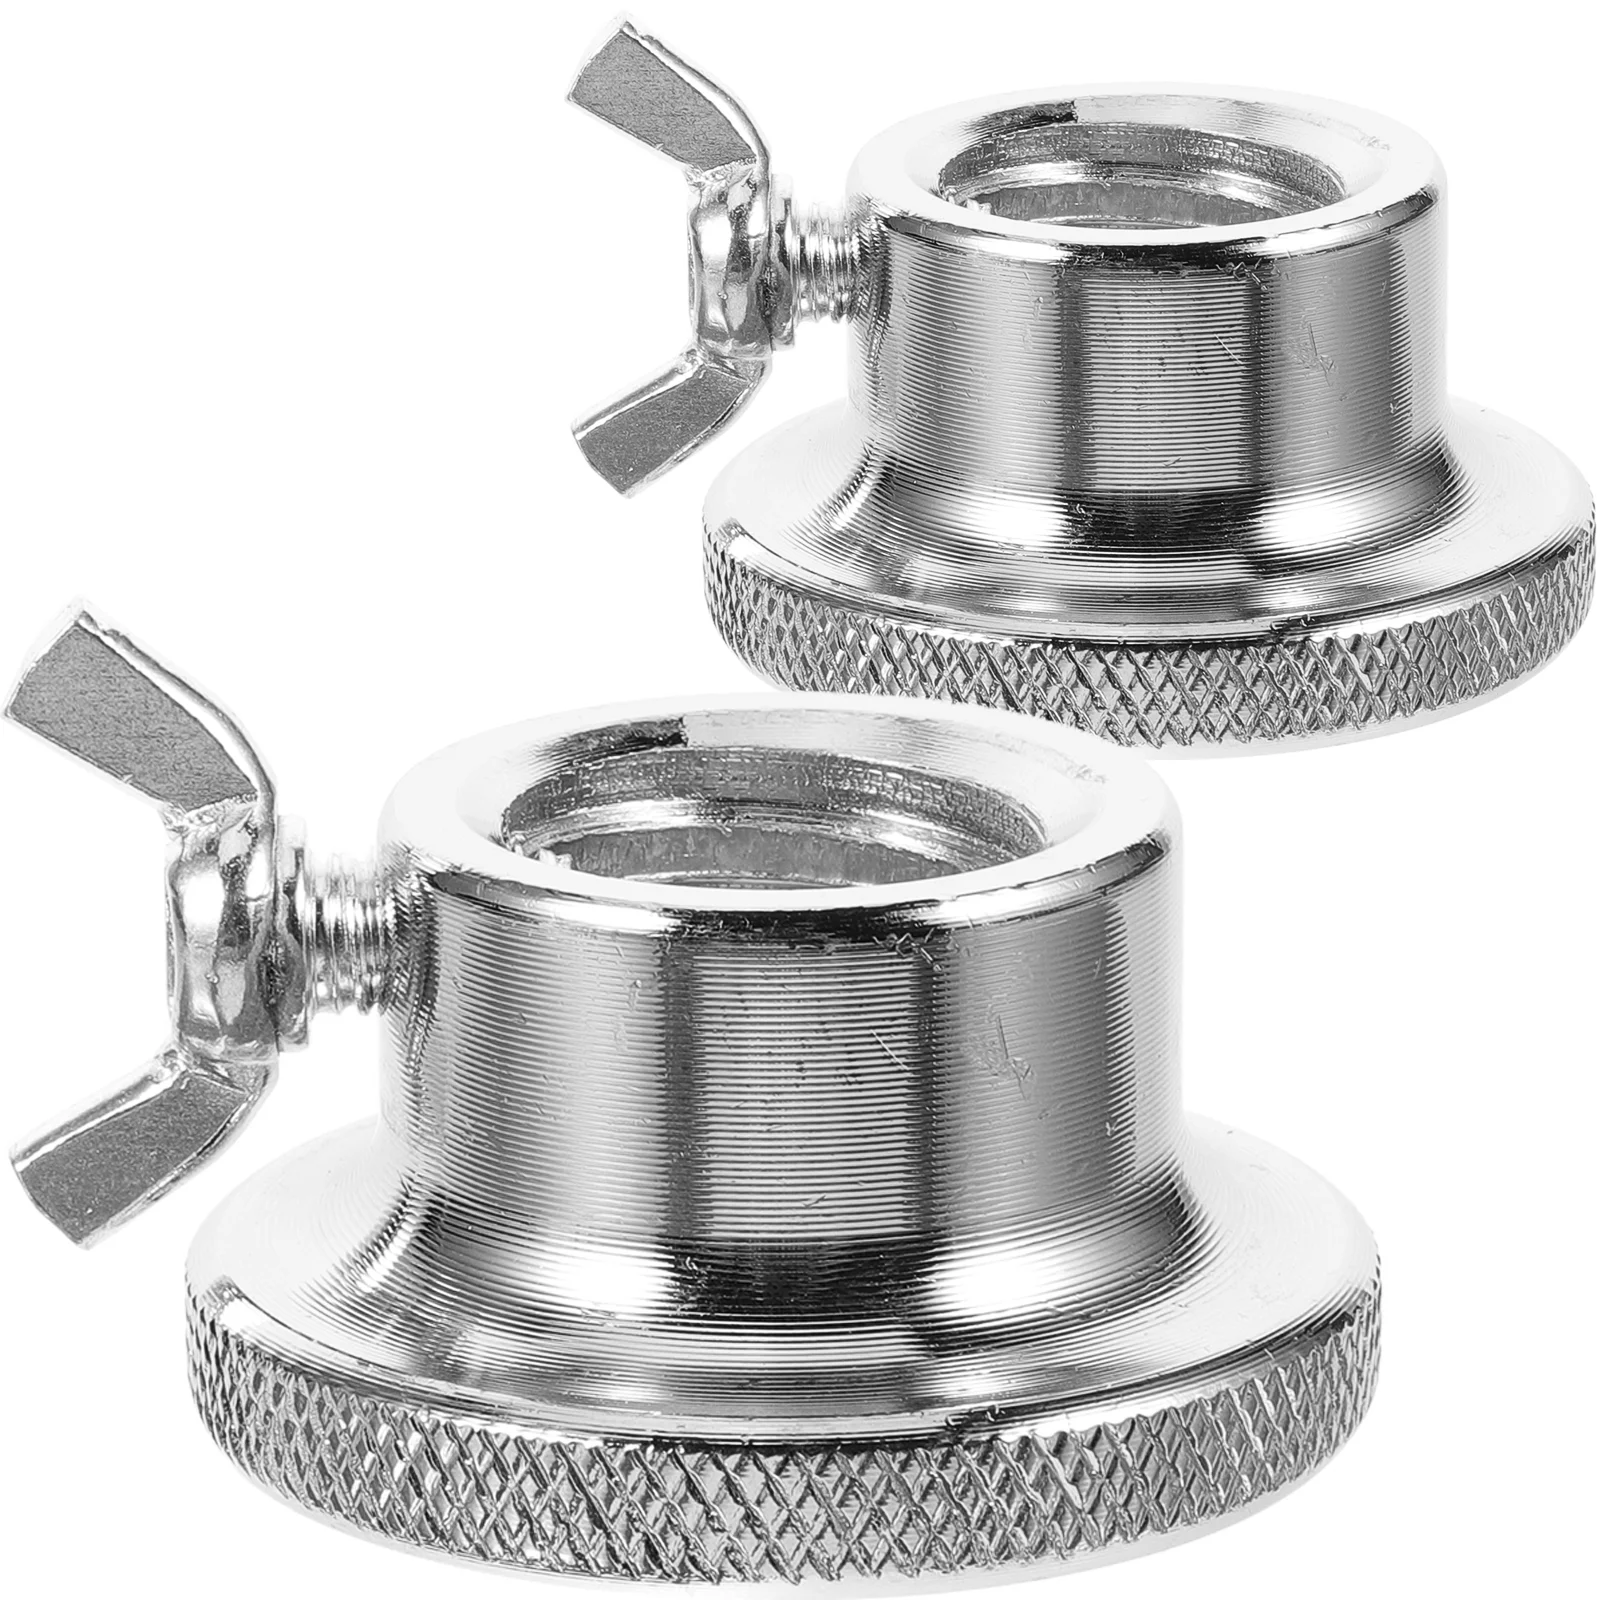 

2pcs Spinlock Collars Dumbbell Screw Clamps for Barbell Dumbell Weight Lifting Silver 25mm